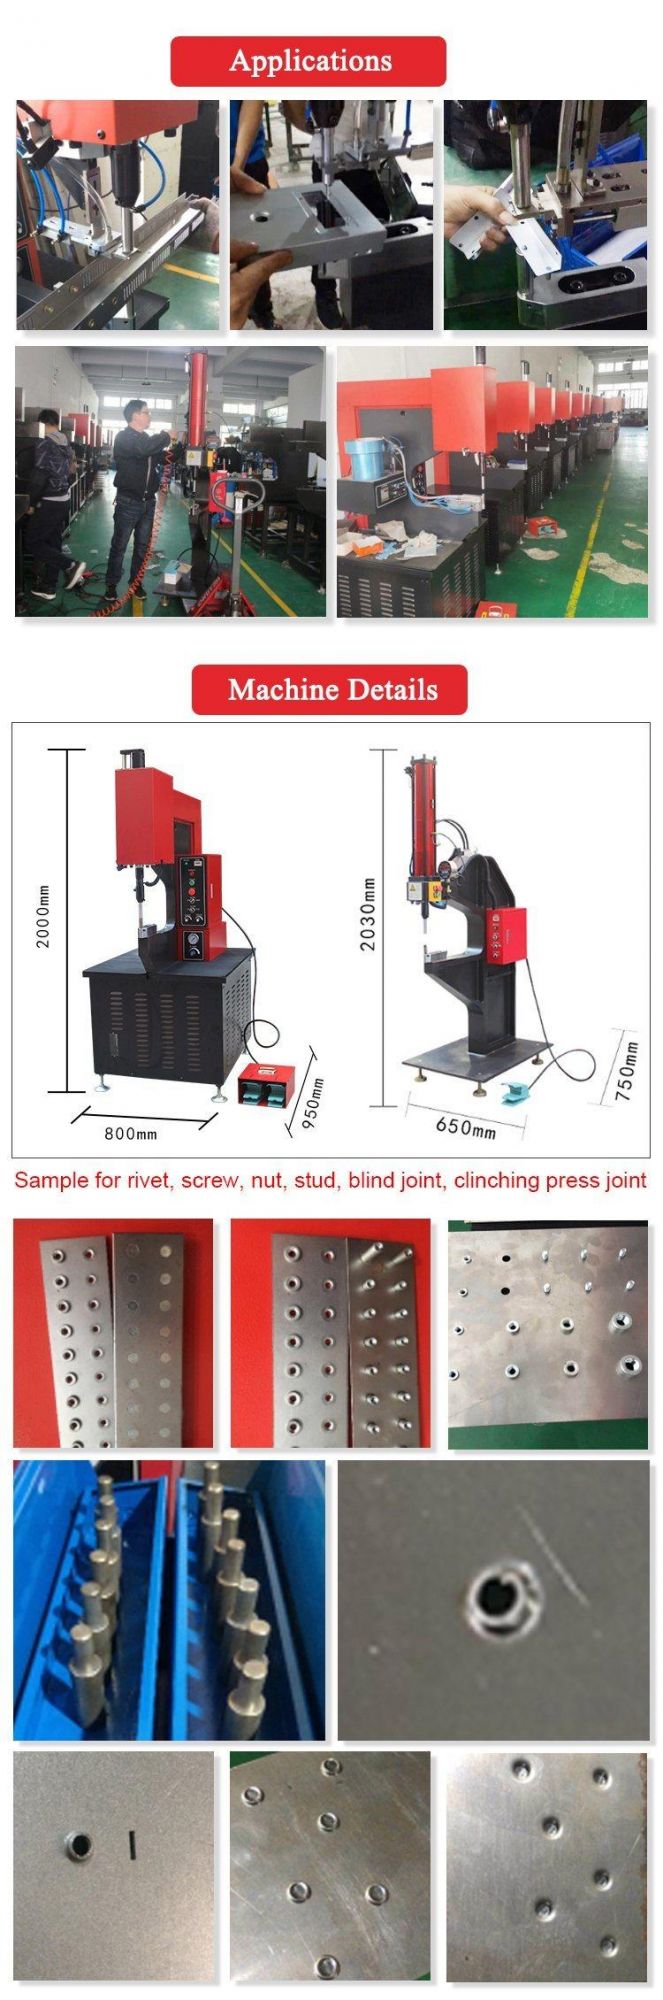 Pressure Automatic Hydraulic Riveting Machine for Nuts Threaded Stud Screw